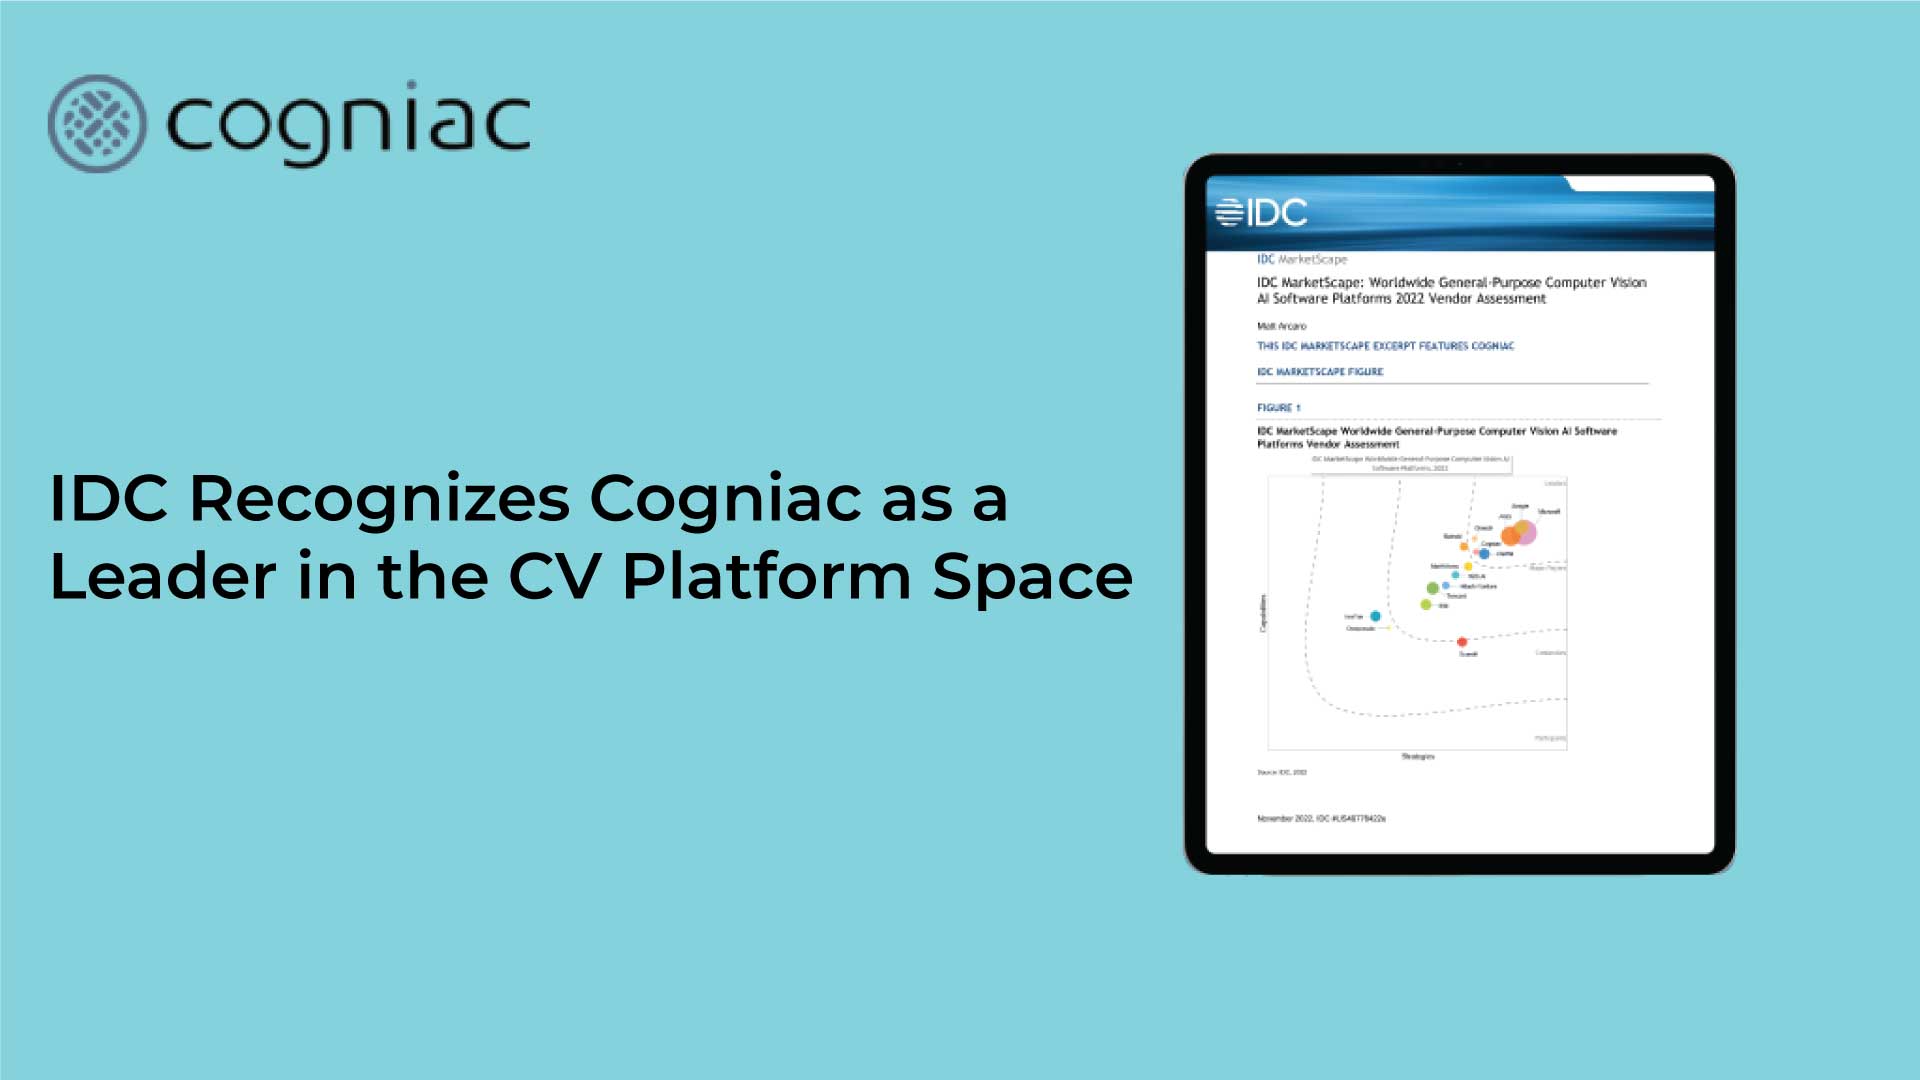 Cogniac Named a “Leader” in IDC MarketScape: Worldwide General-Purpose Computer Vision AI Software Platforms